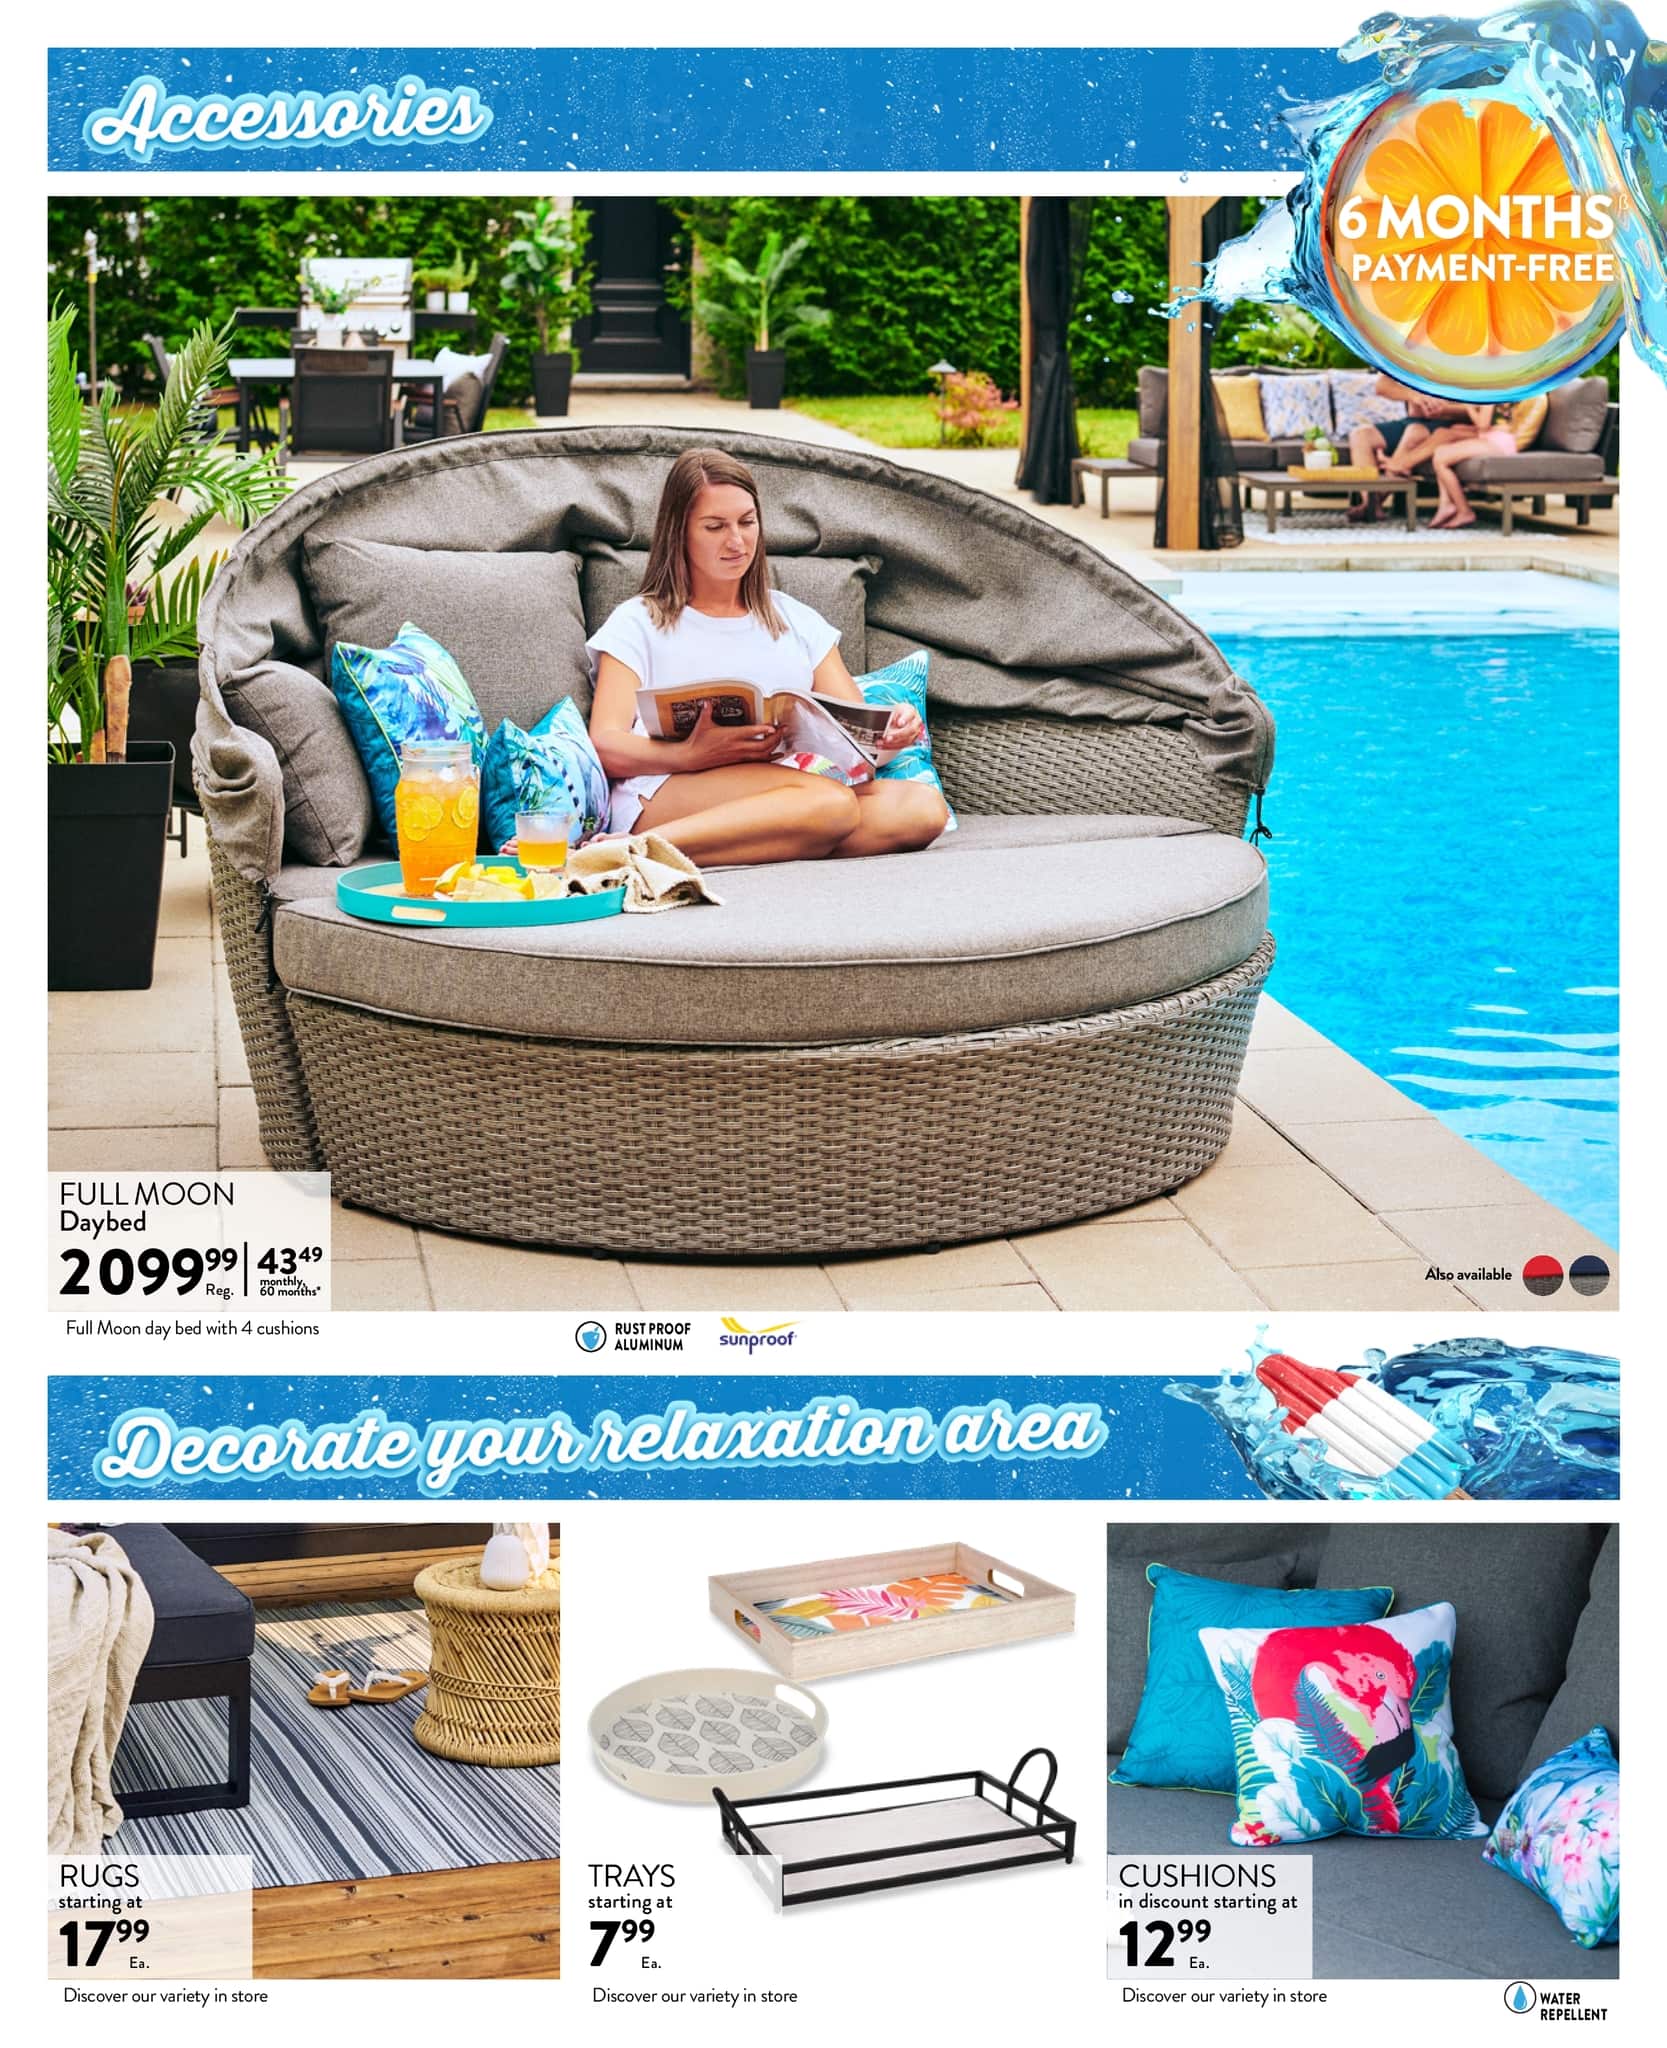 Club Piscine Super Fitness - Monthly Savings - Page 14